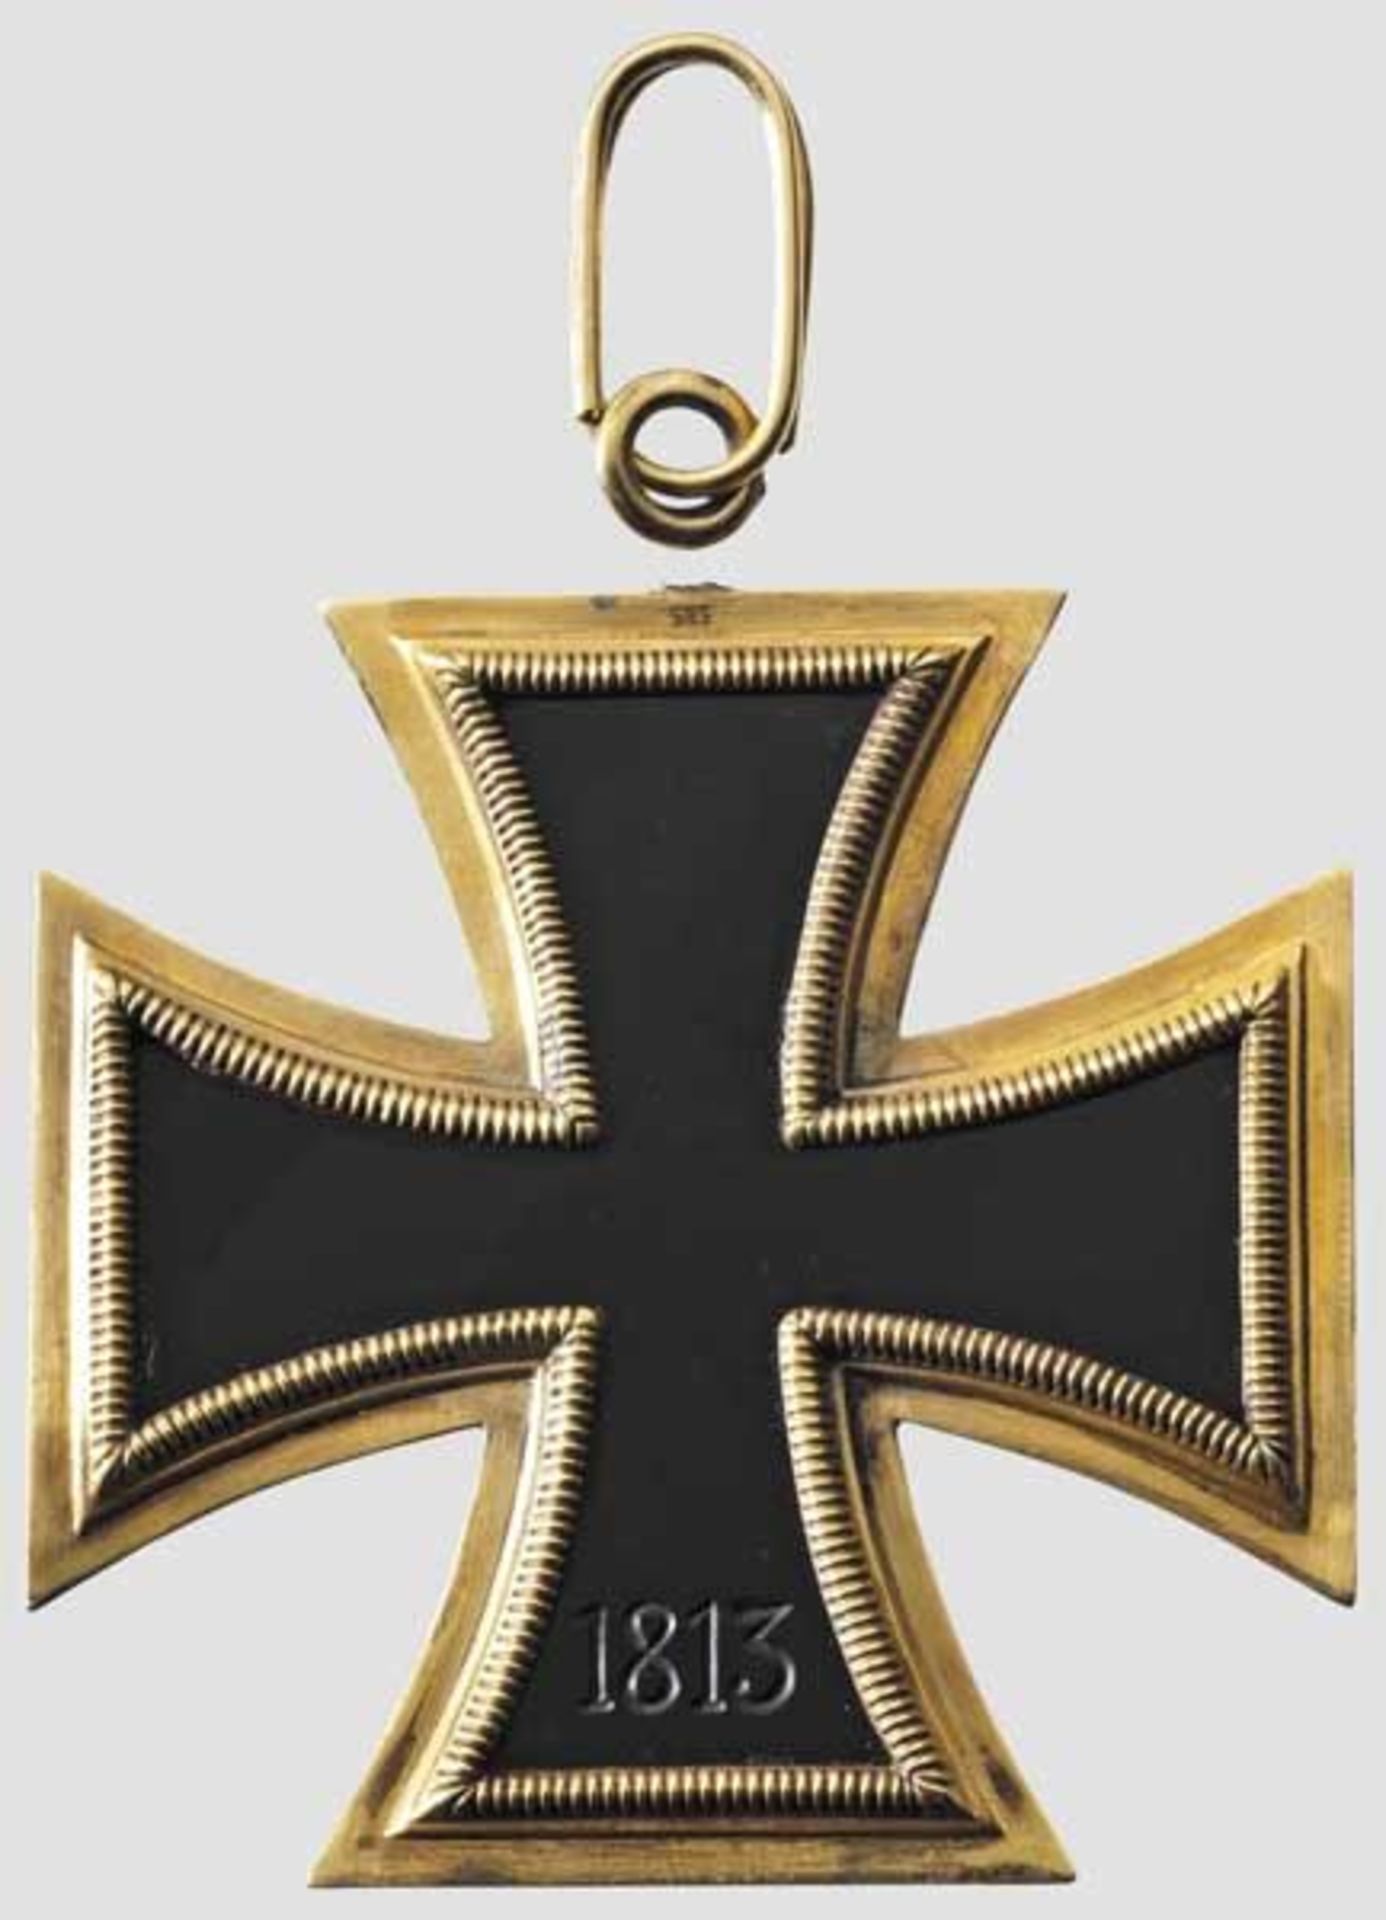 J. Godet & Son - a Grand Cross of the Iron Cross of 1939 in Gold and Onyx - probably a workshop - Bild 3 aus 4